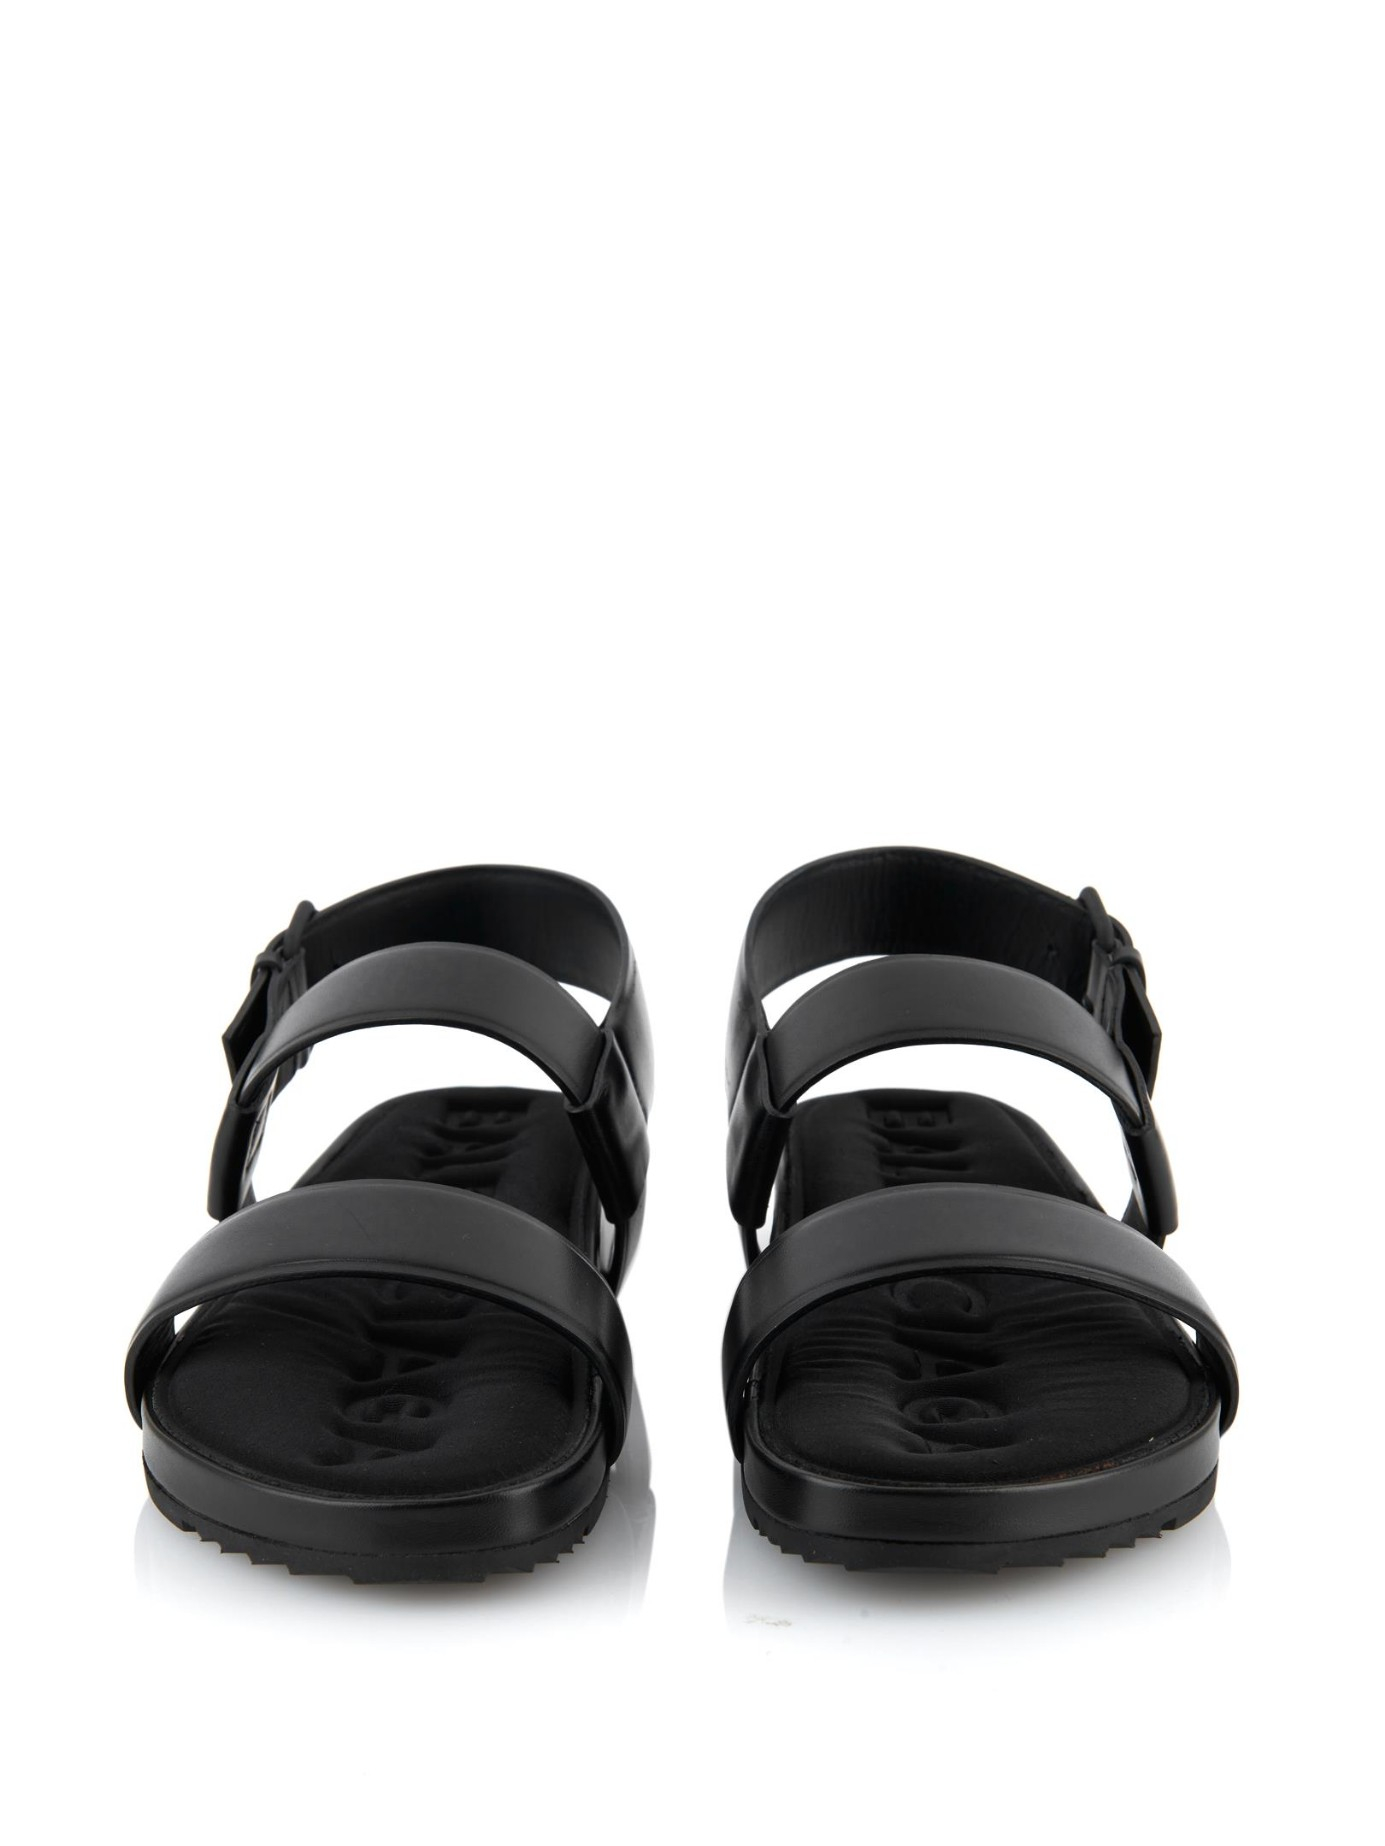 Lyst - Balenciaga Double-Strap Leather Sandals in Black1385 x 1846